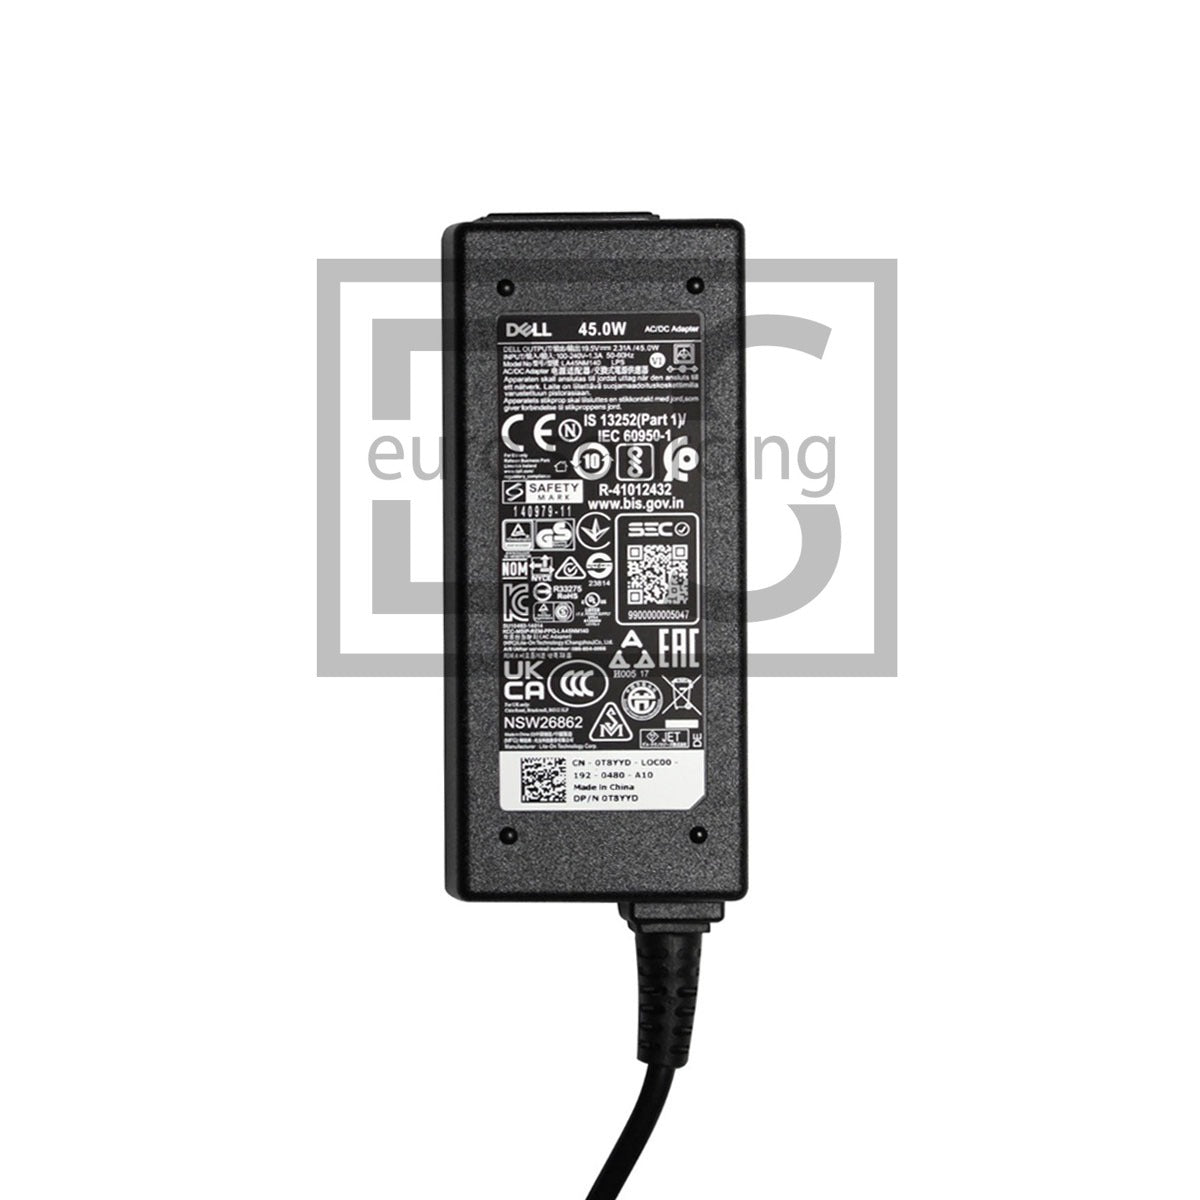 Genuine DELL 19.5V 2.31A DELC231 *ROUND* TYPE DELL BRAND 45W AC ADAPTER 4.5MM x 3.0MM Compatible With DELL INSPIRON 15 5568 2-IN-1